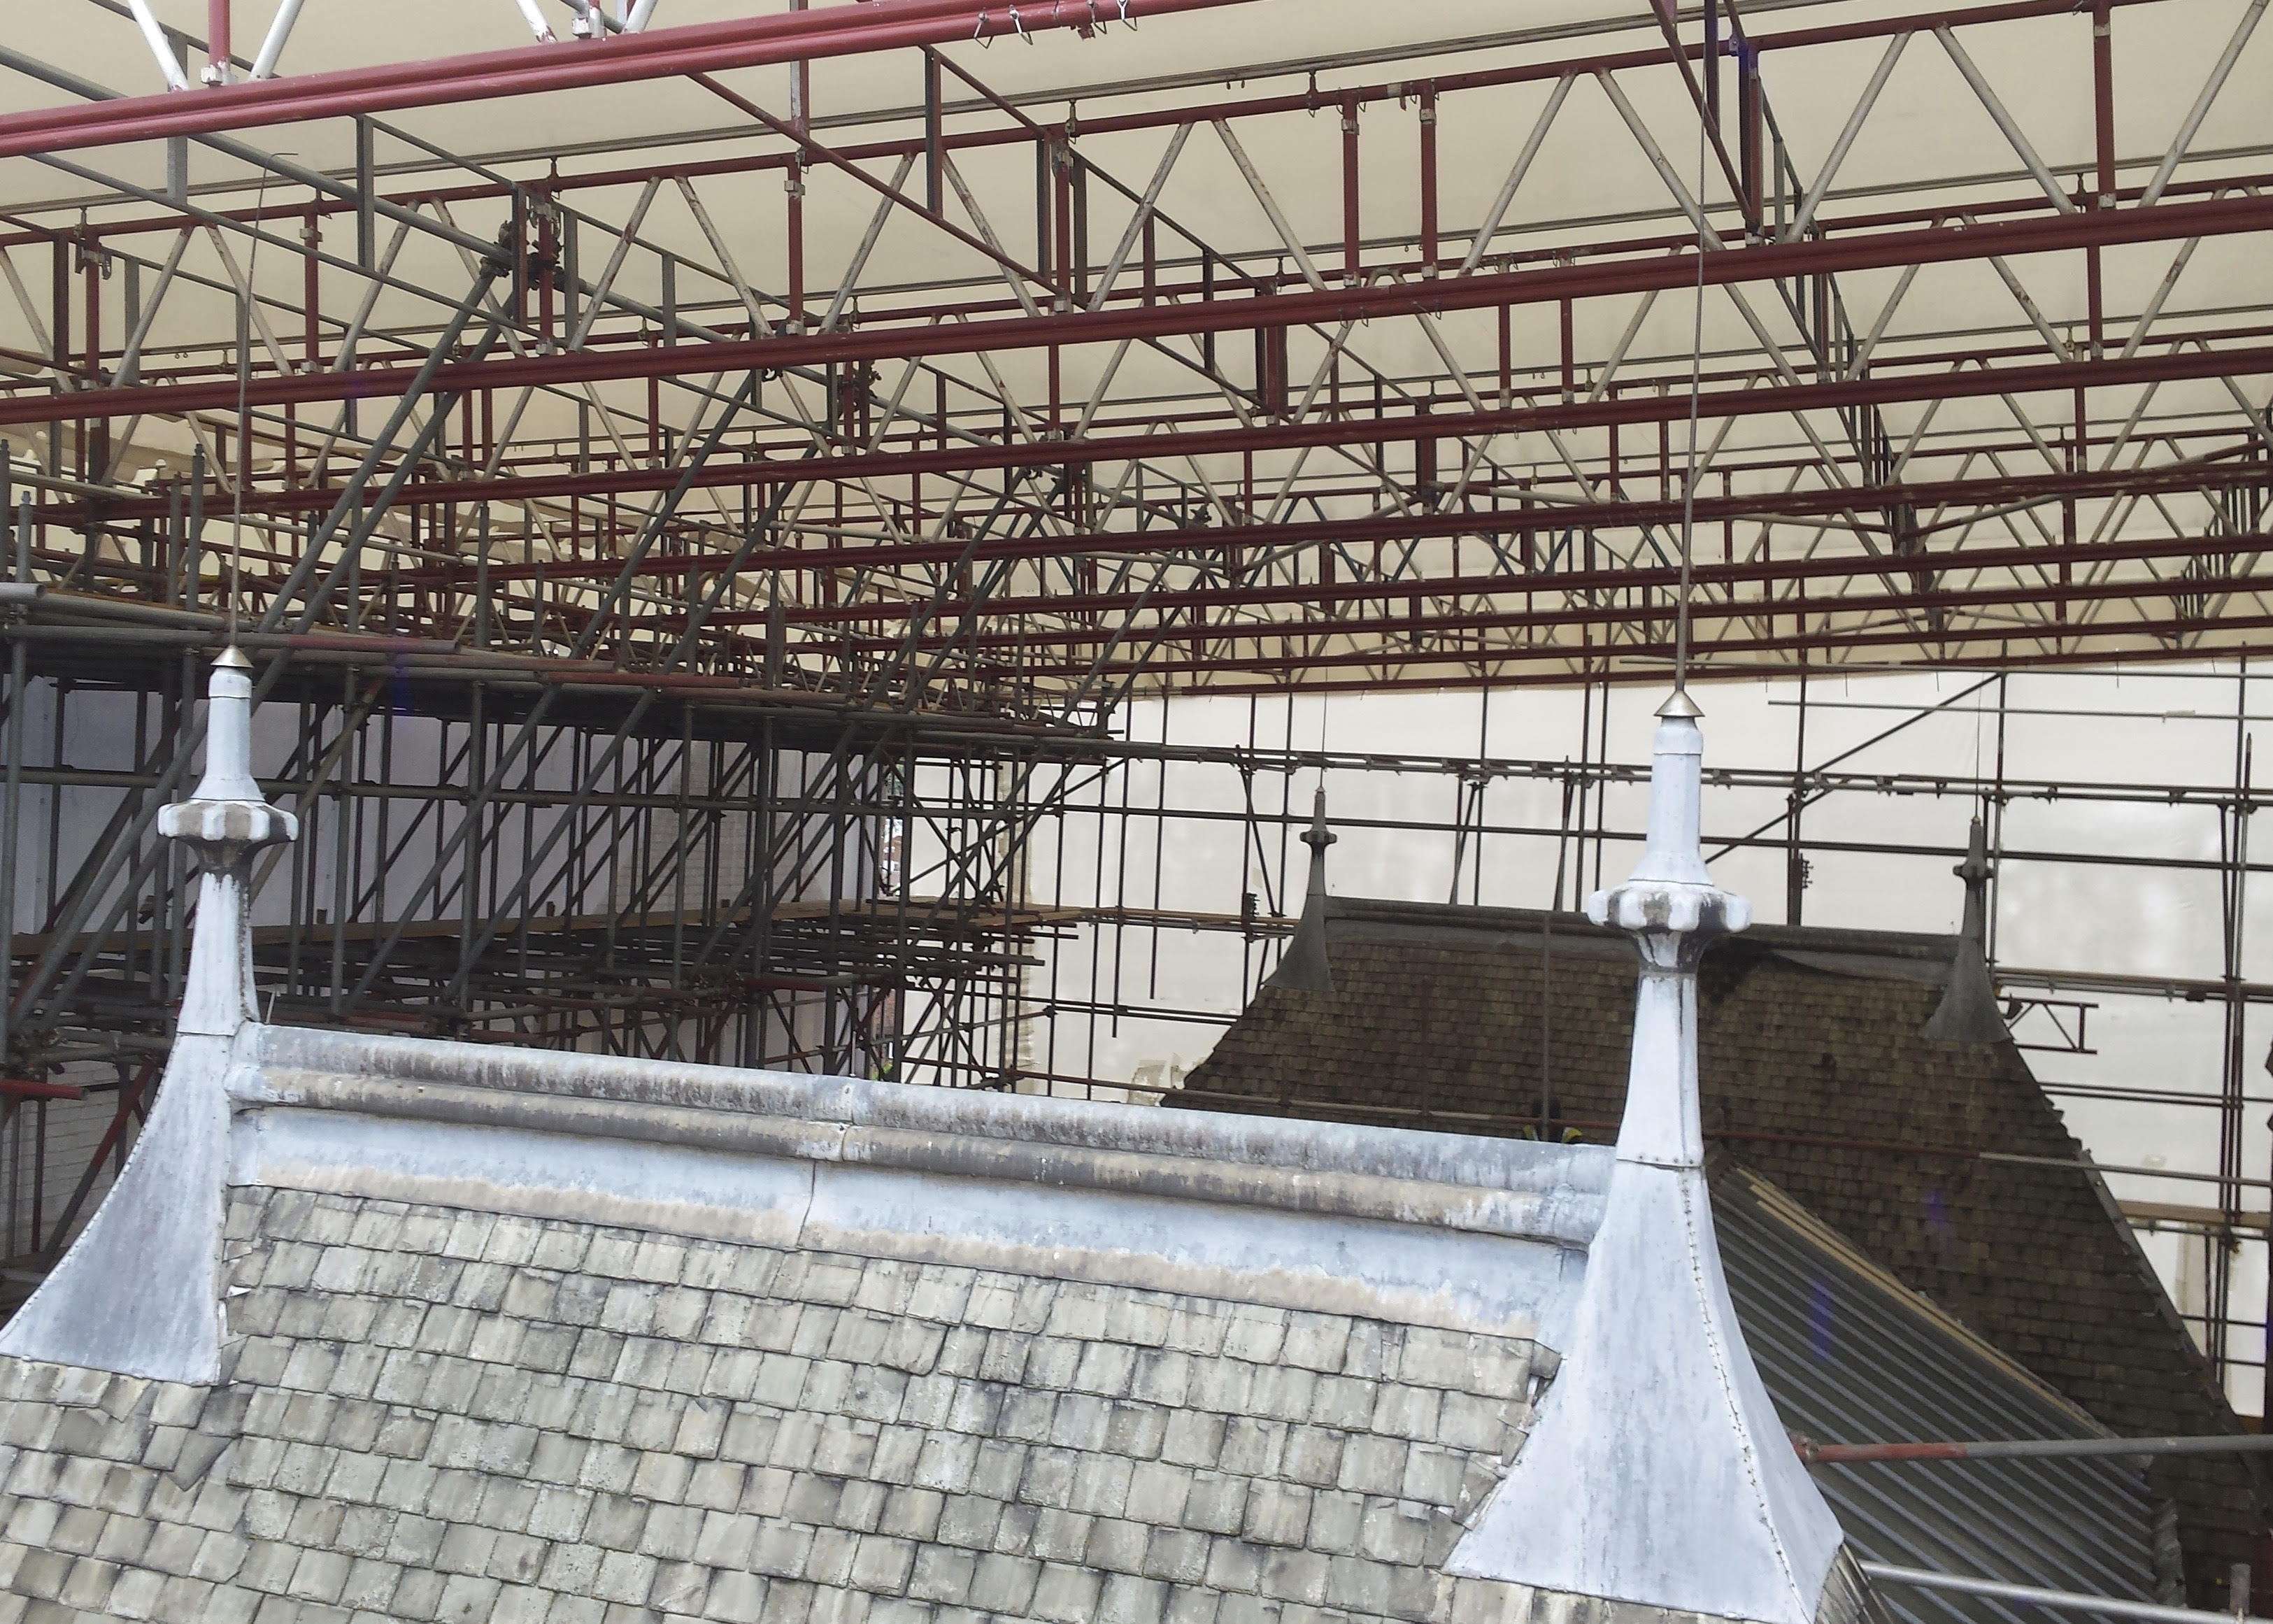 Tamworth Scaffolding: Temporary Roof - Temporary Roofs Historic Building
